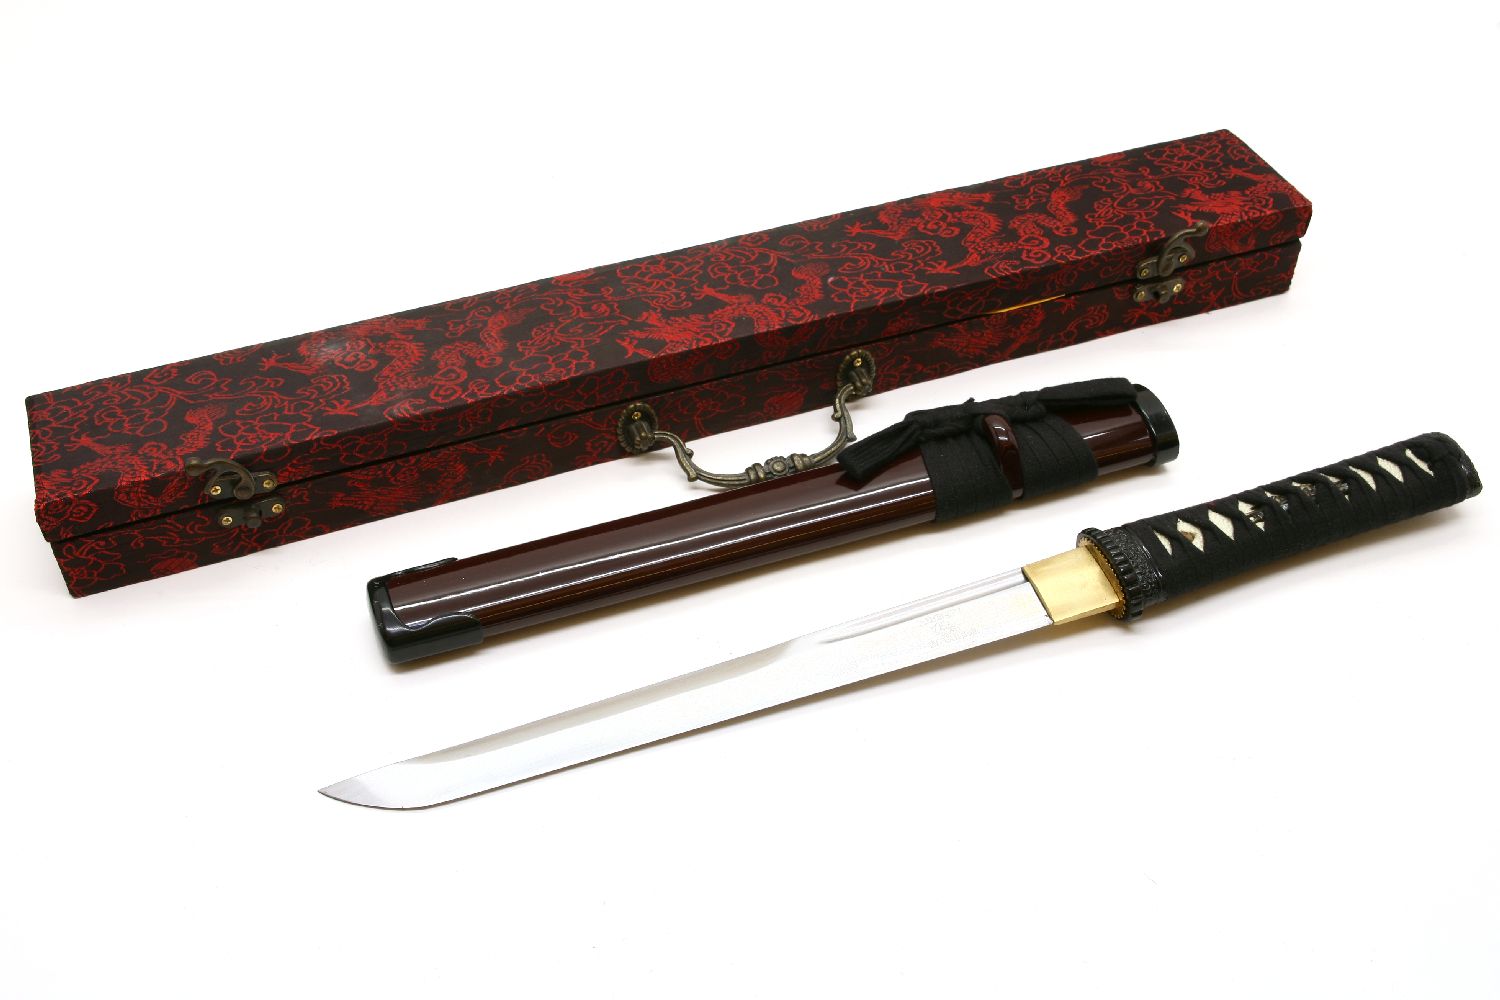 A replica Japanese tanto and scabbard